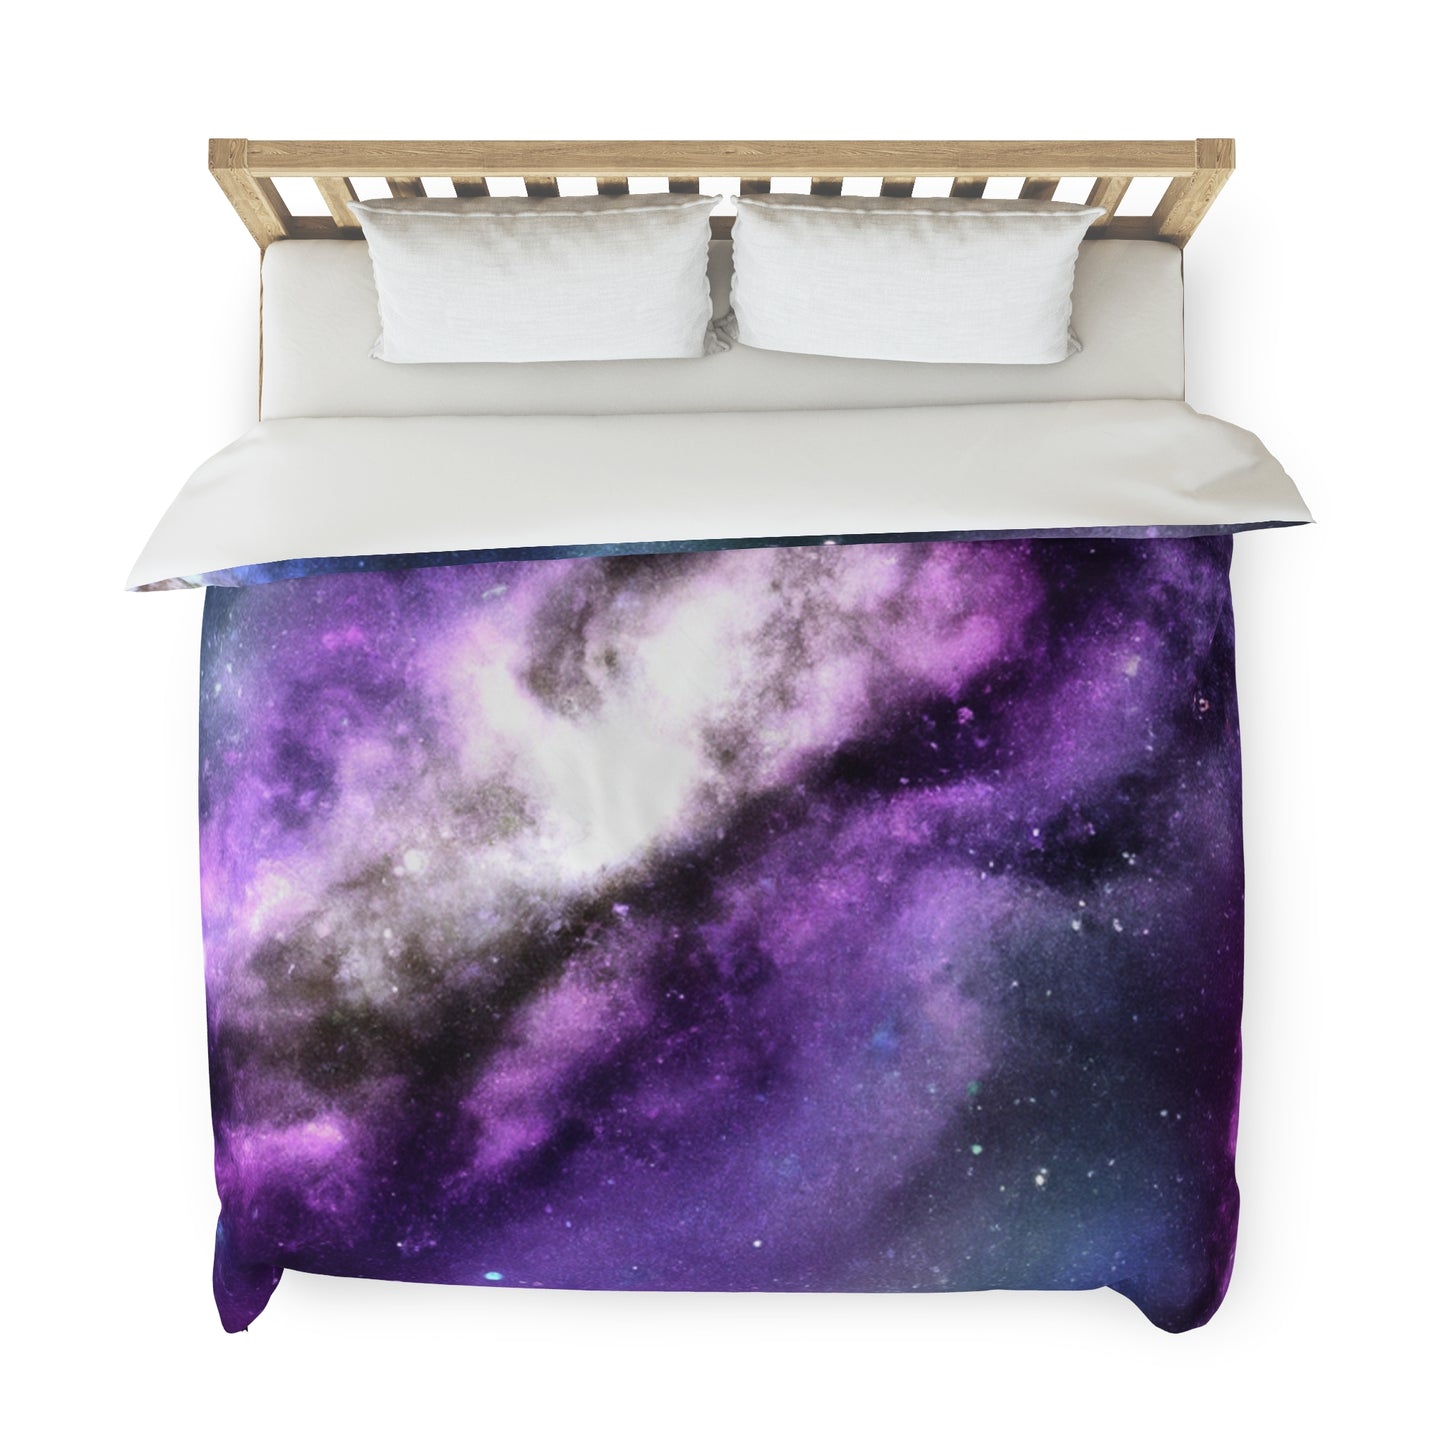 The Dream of the Drive-In Starlet - Astronomy Duvet Bed Cover